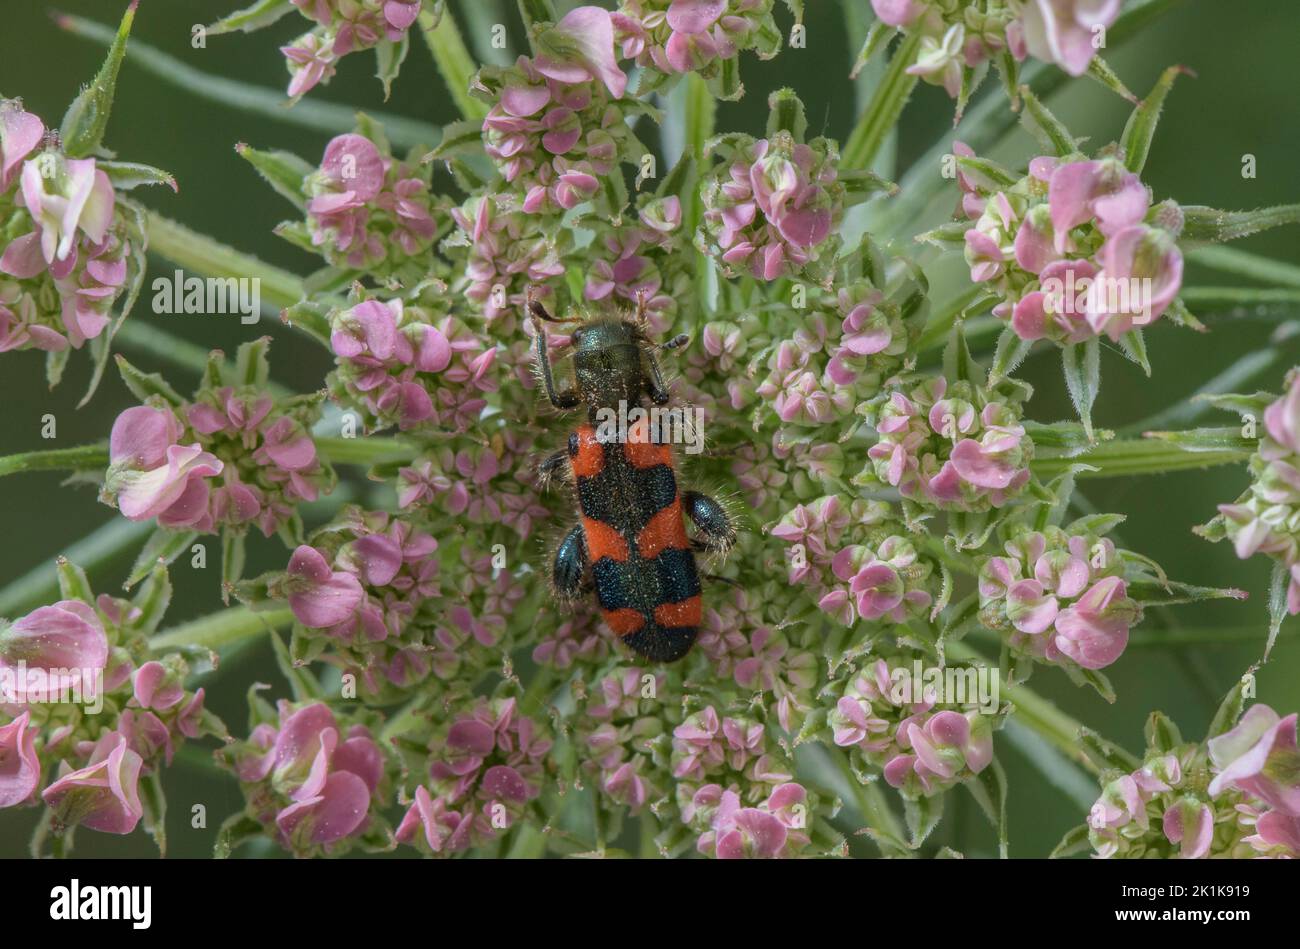 A checkered beetle on Wild Carrot flowers, Trichodes apiarius, Stock Photo